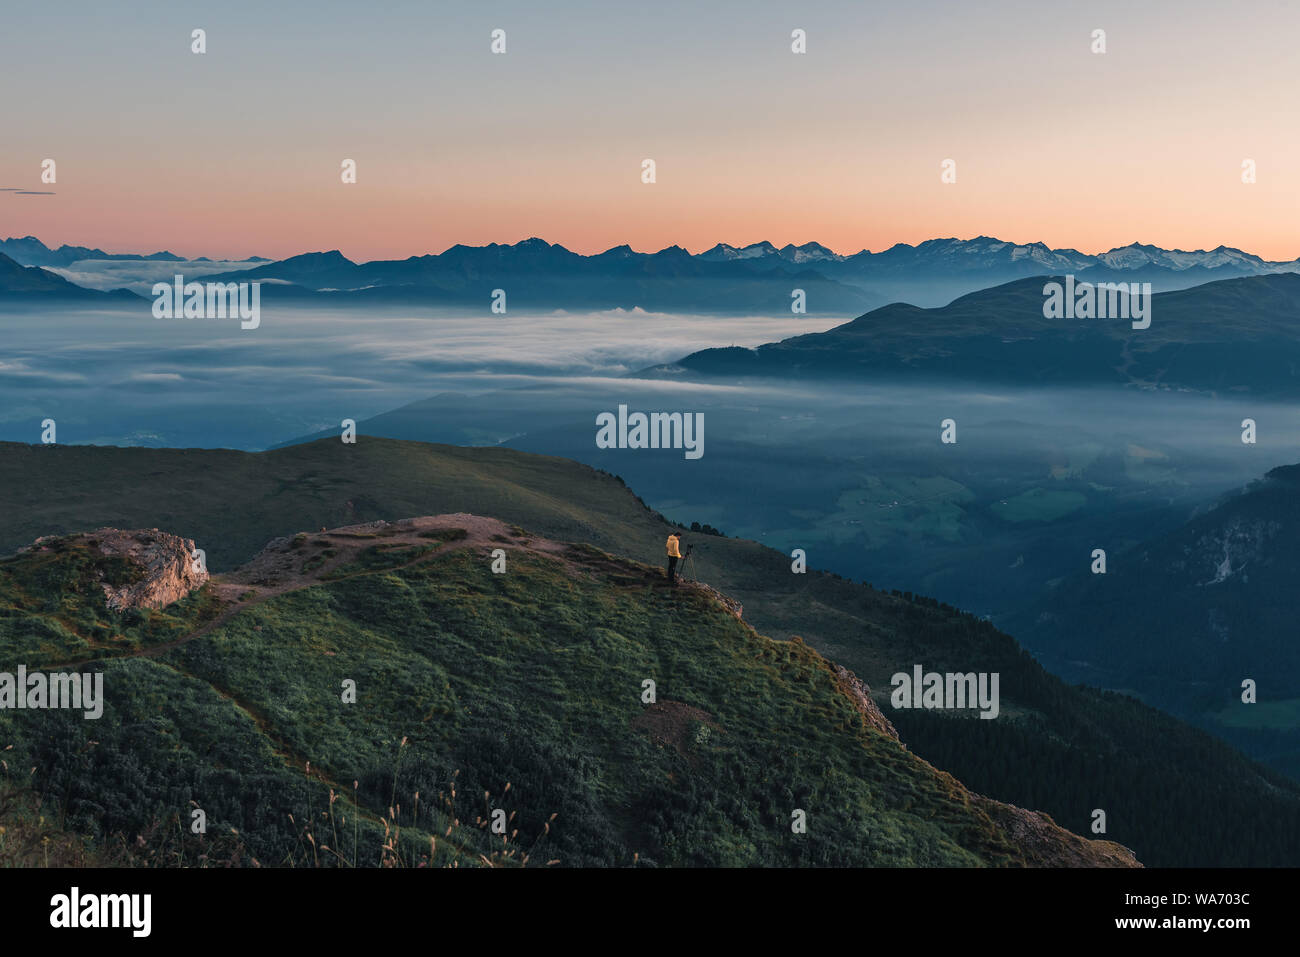 Nature photographer in action. Man standing on the mountain above a misty clouds waiting for sunrise. morning mountain landscape Stock Photo